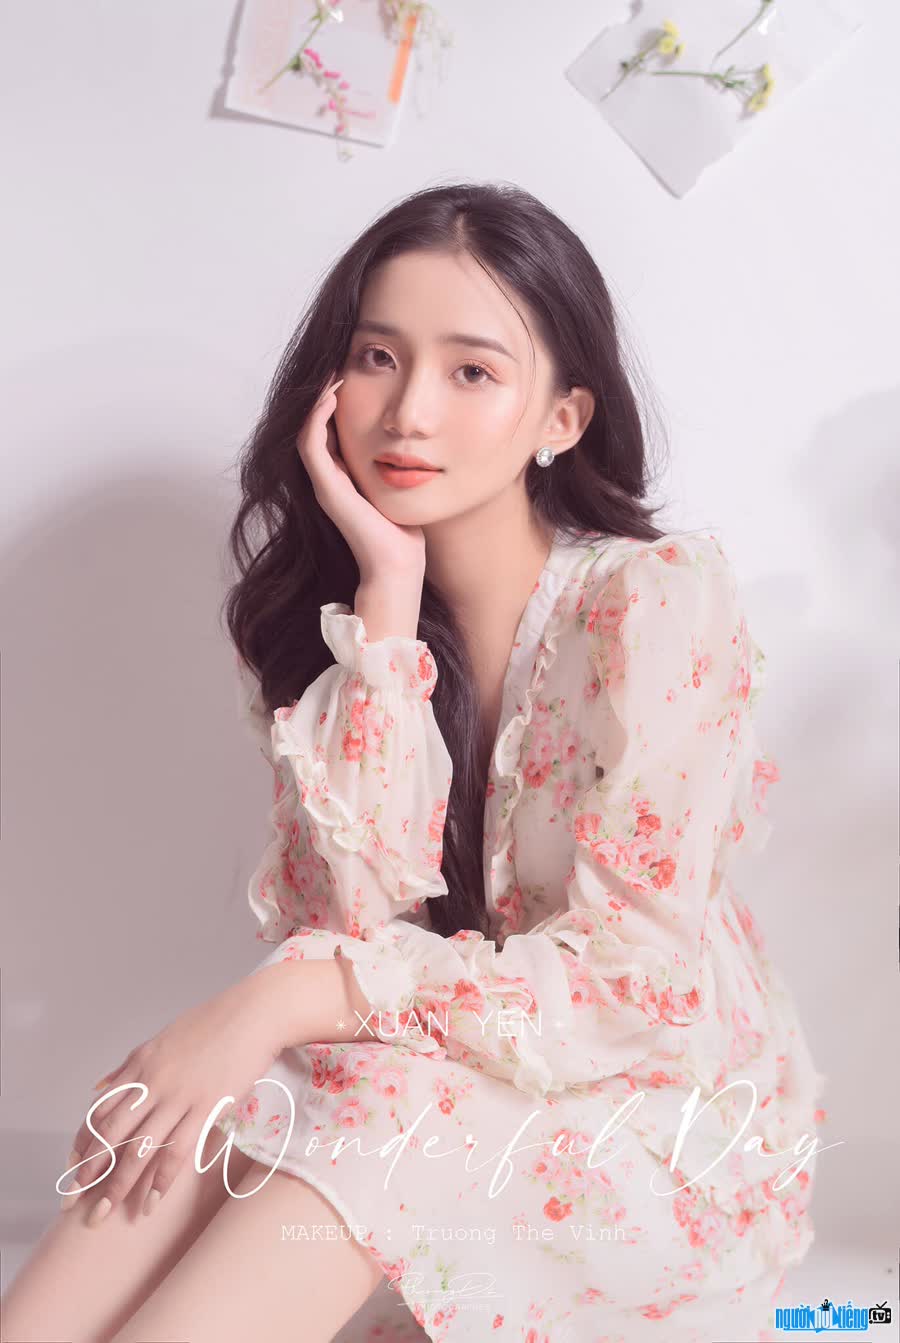 Xuan Yen with the desire to pursue an artistic path in the future